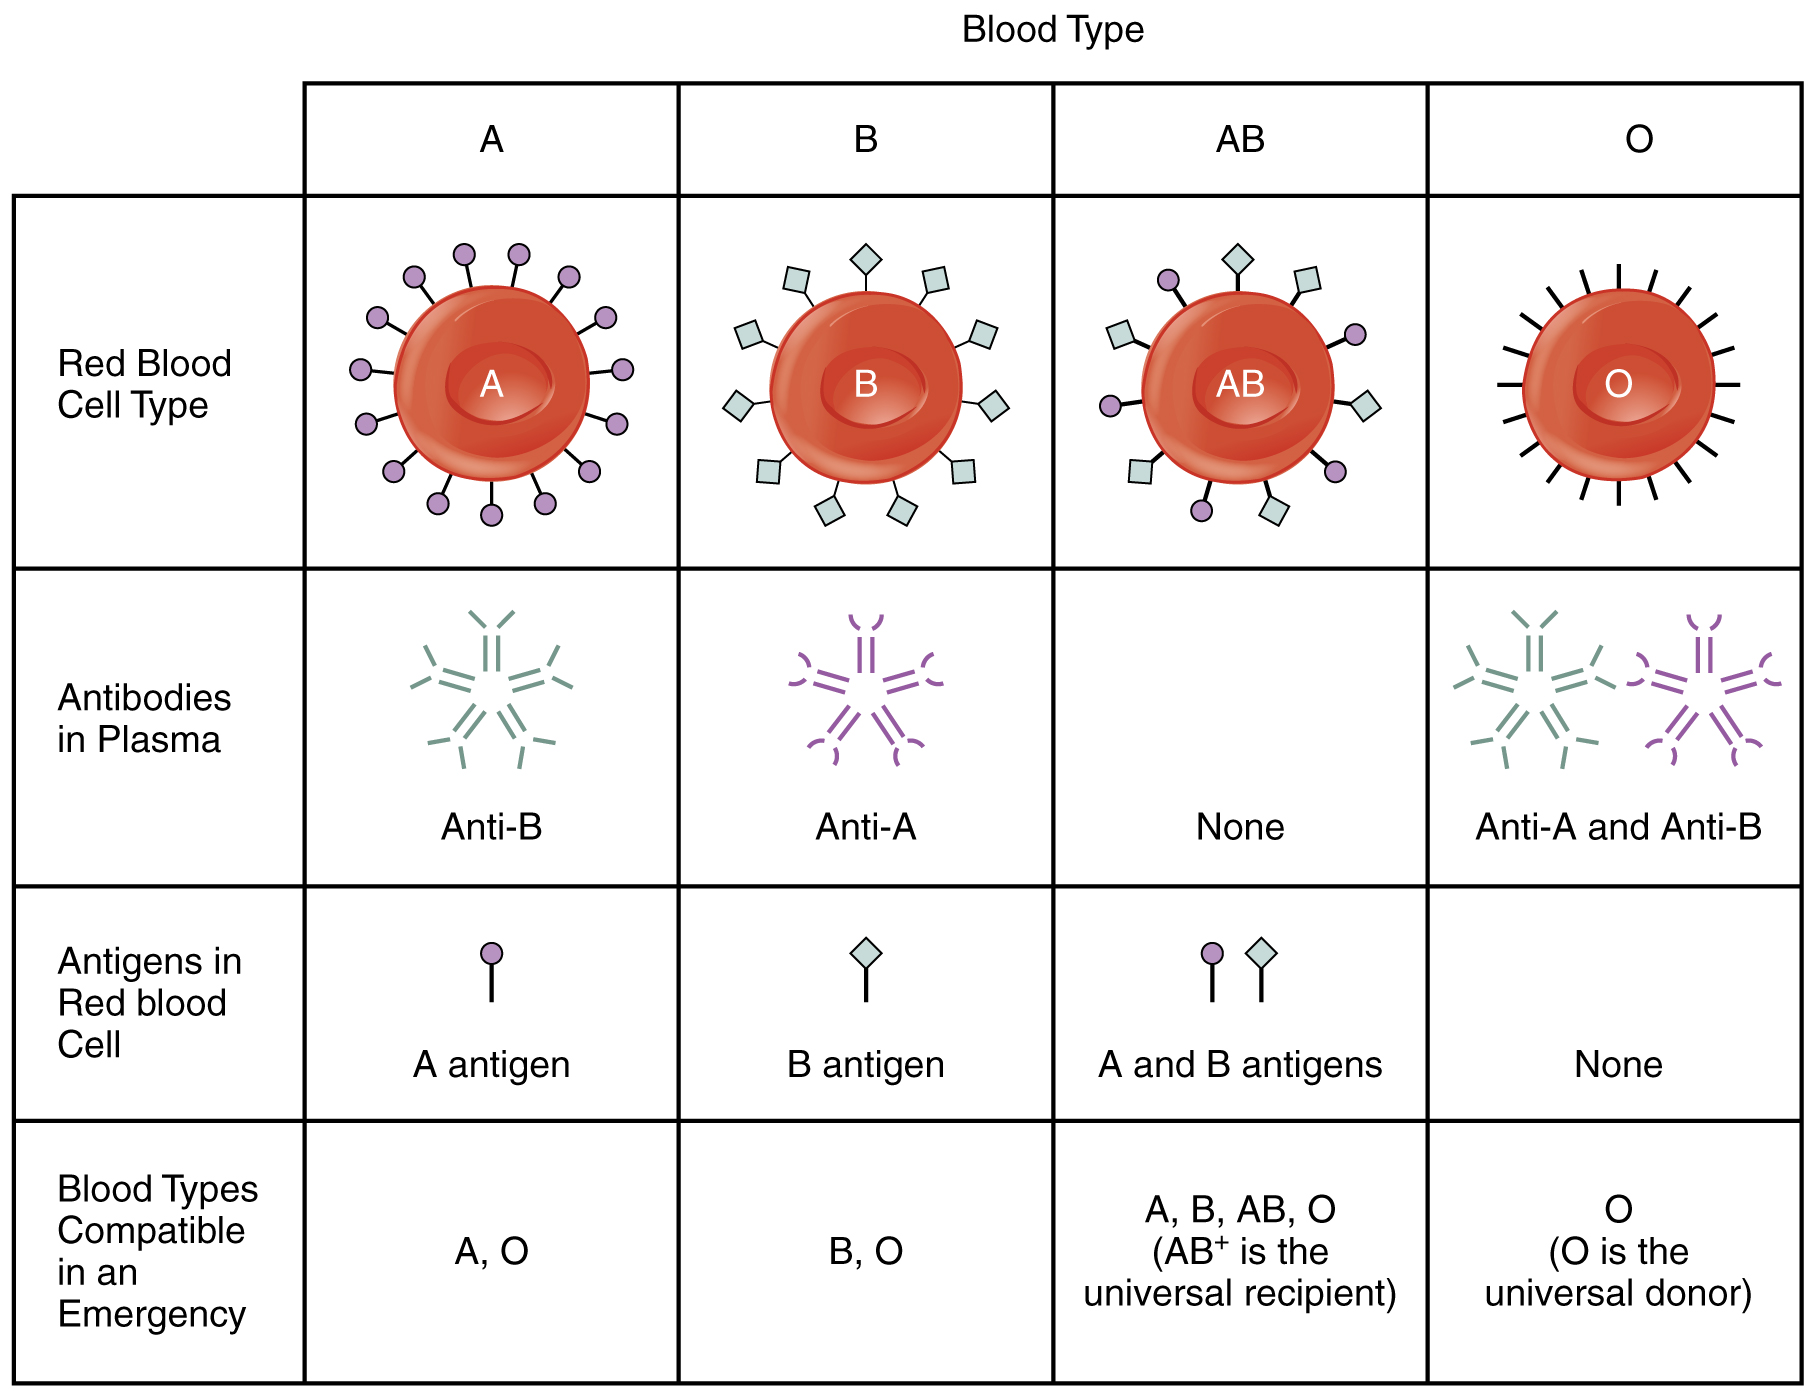 Molecular characteristics of the ABO blood group